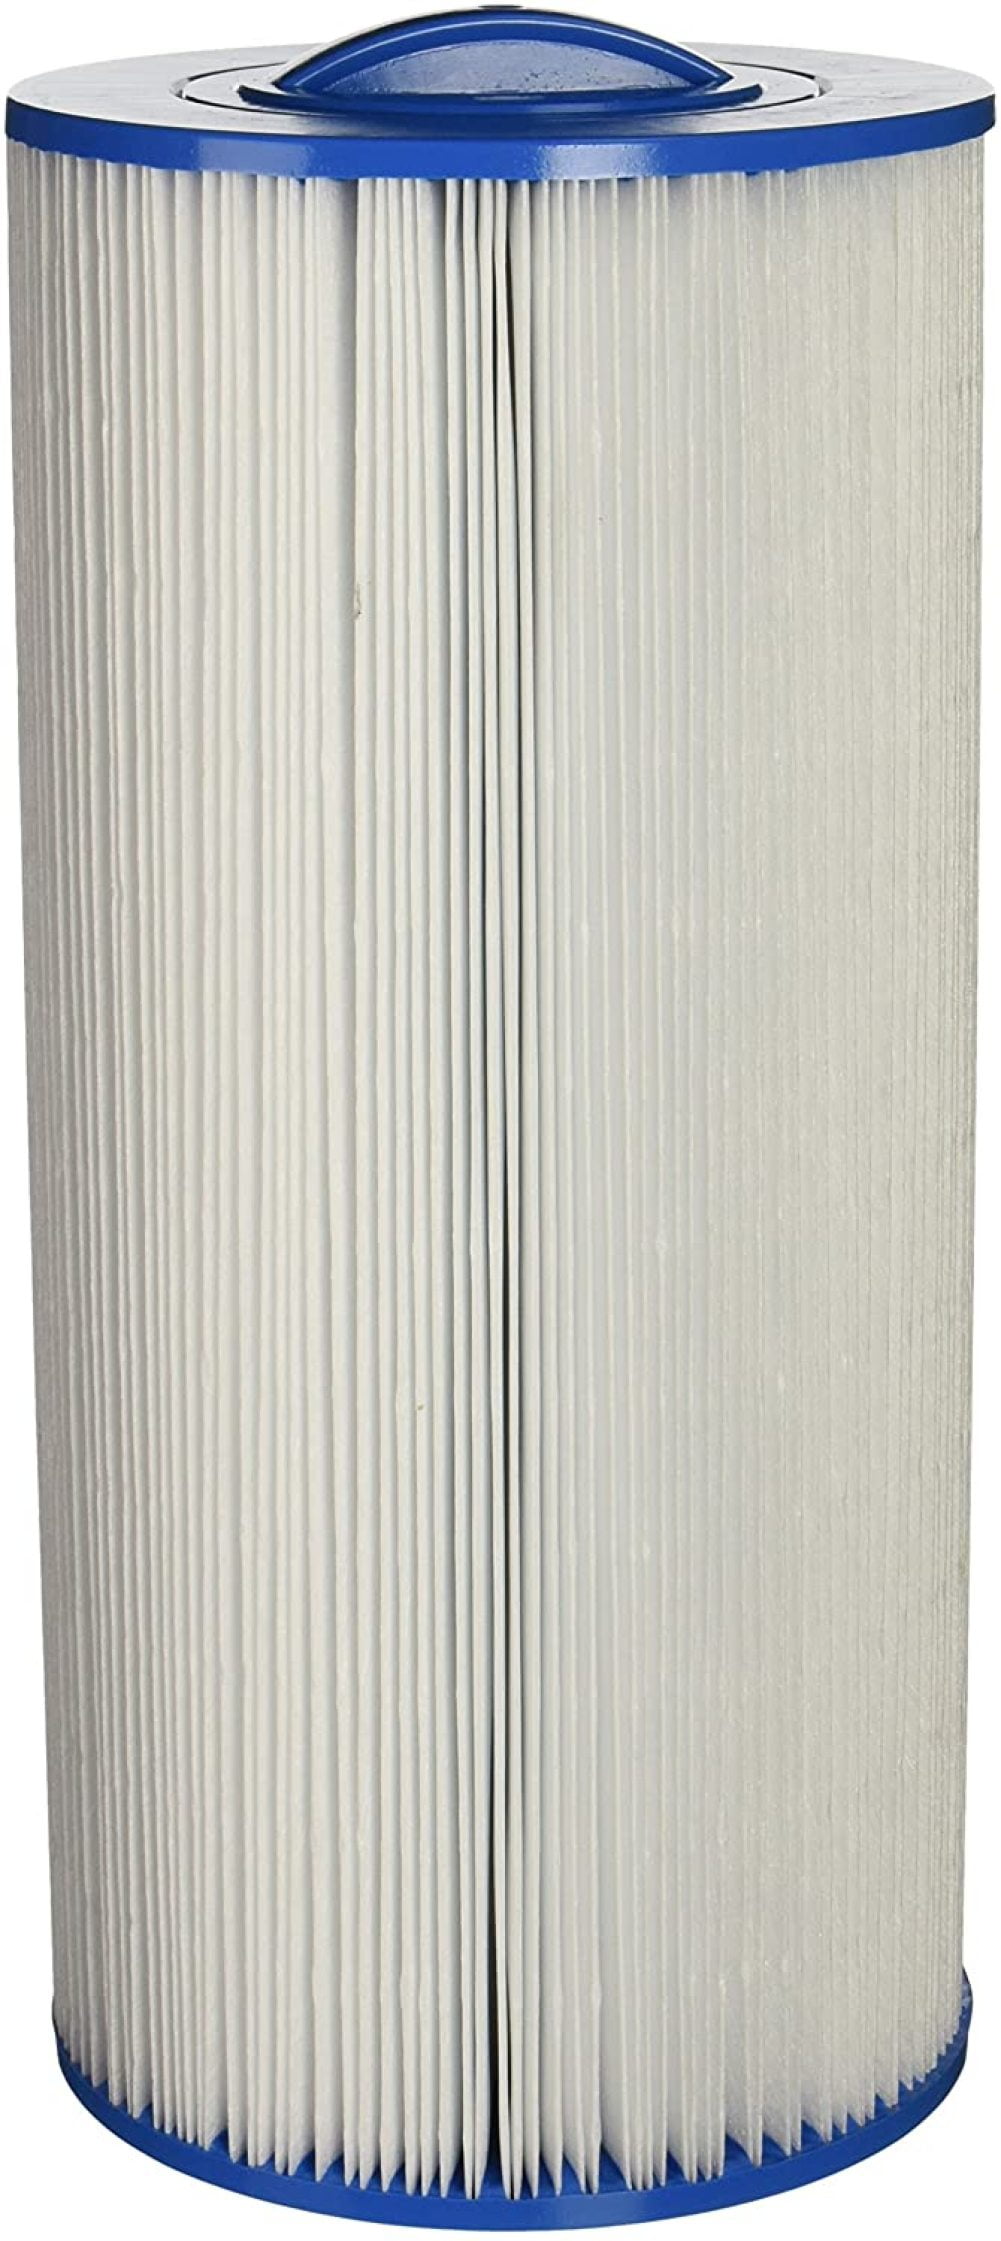 Unicel 6ch-47 Top Load Replacement Spa Filter Cartridge 50 SQ FT Ptl47w Fc-0315 for sale online 